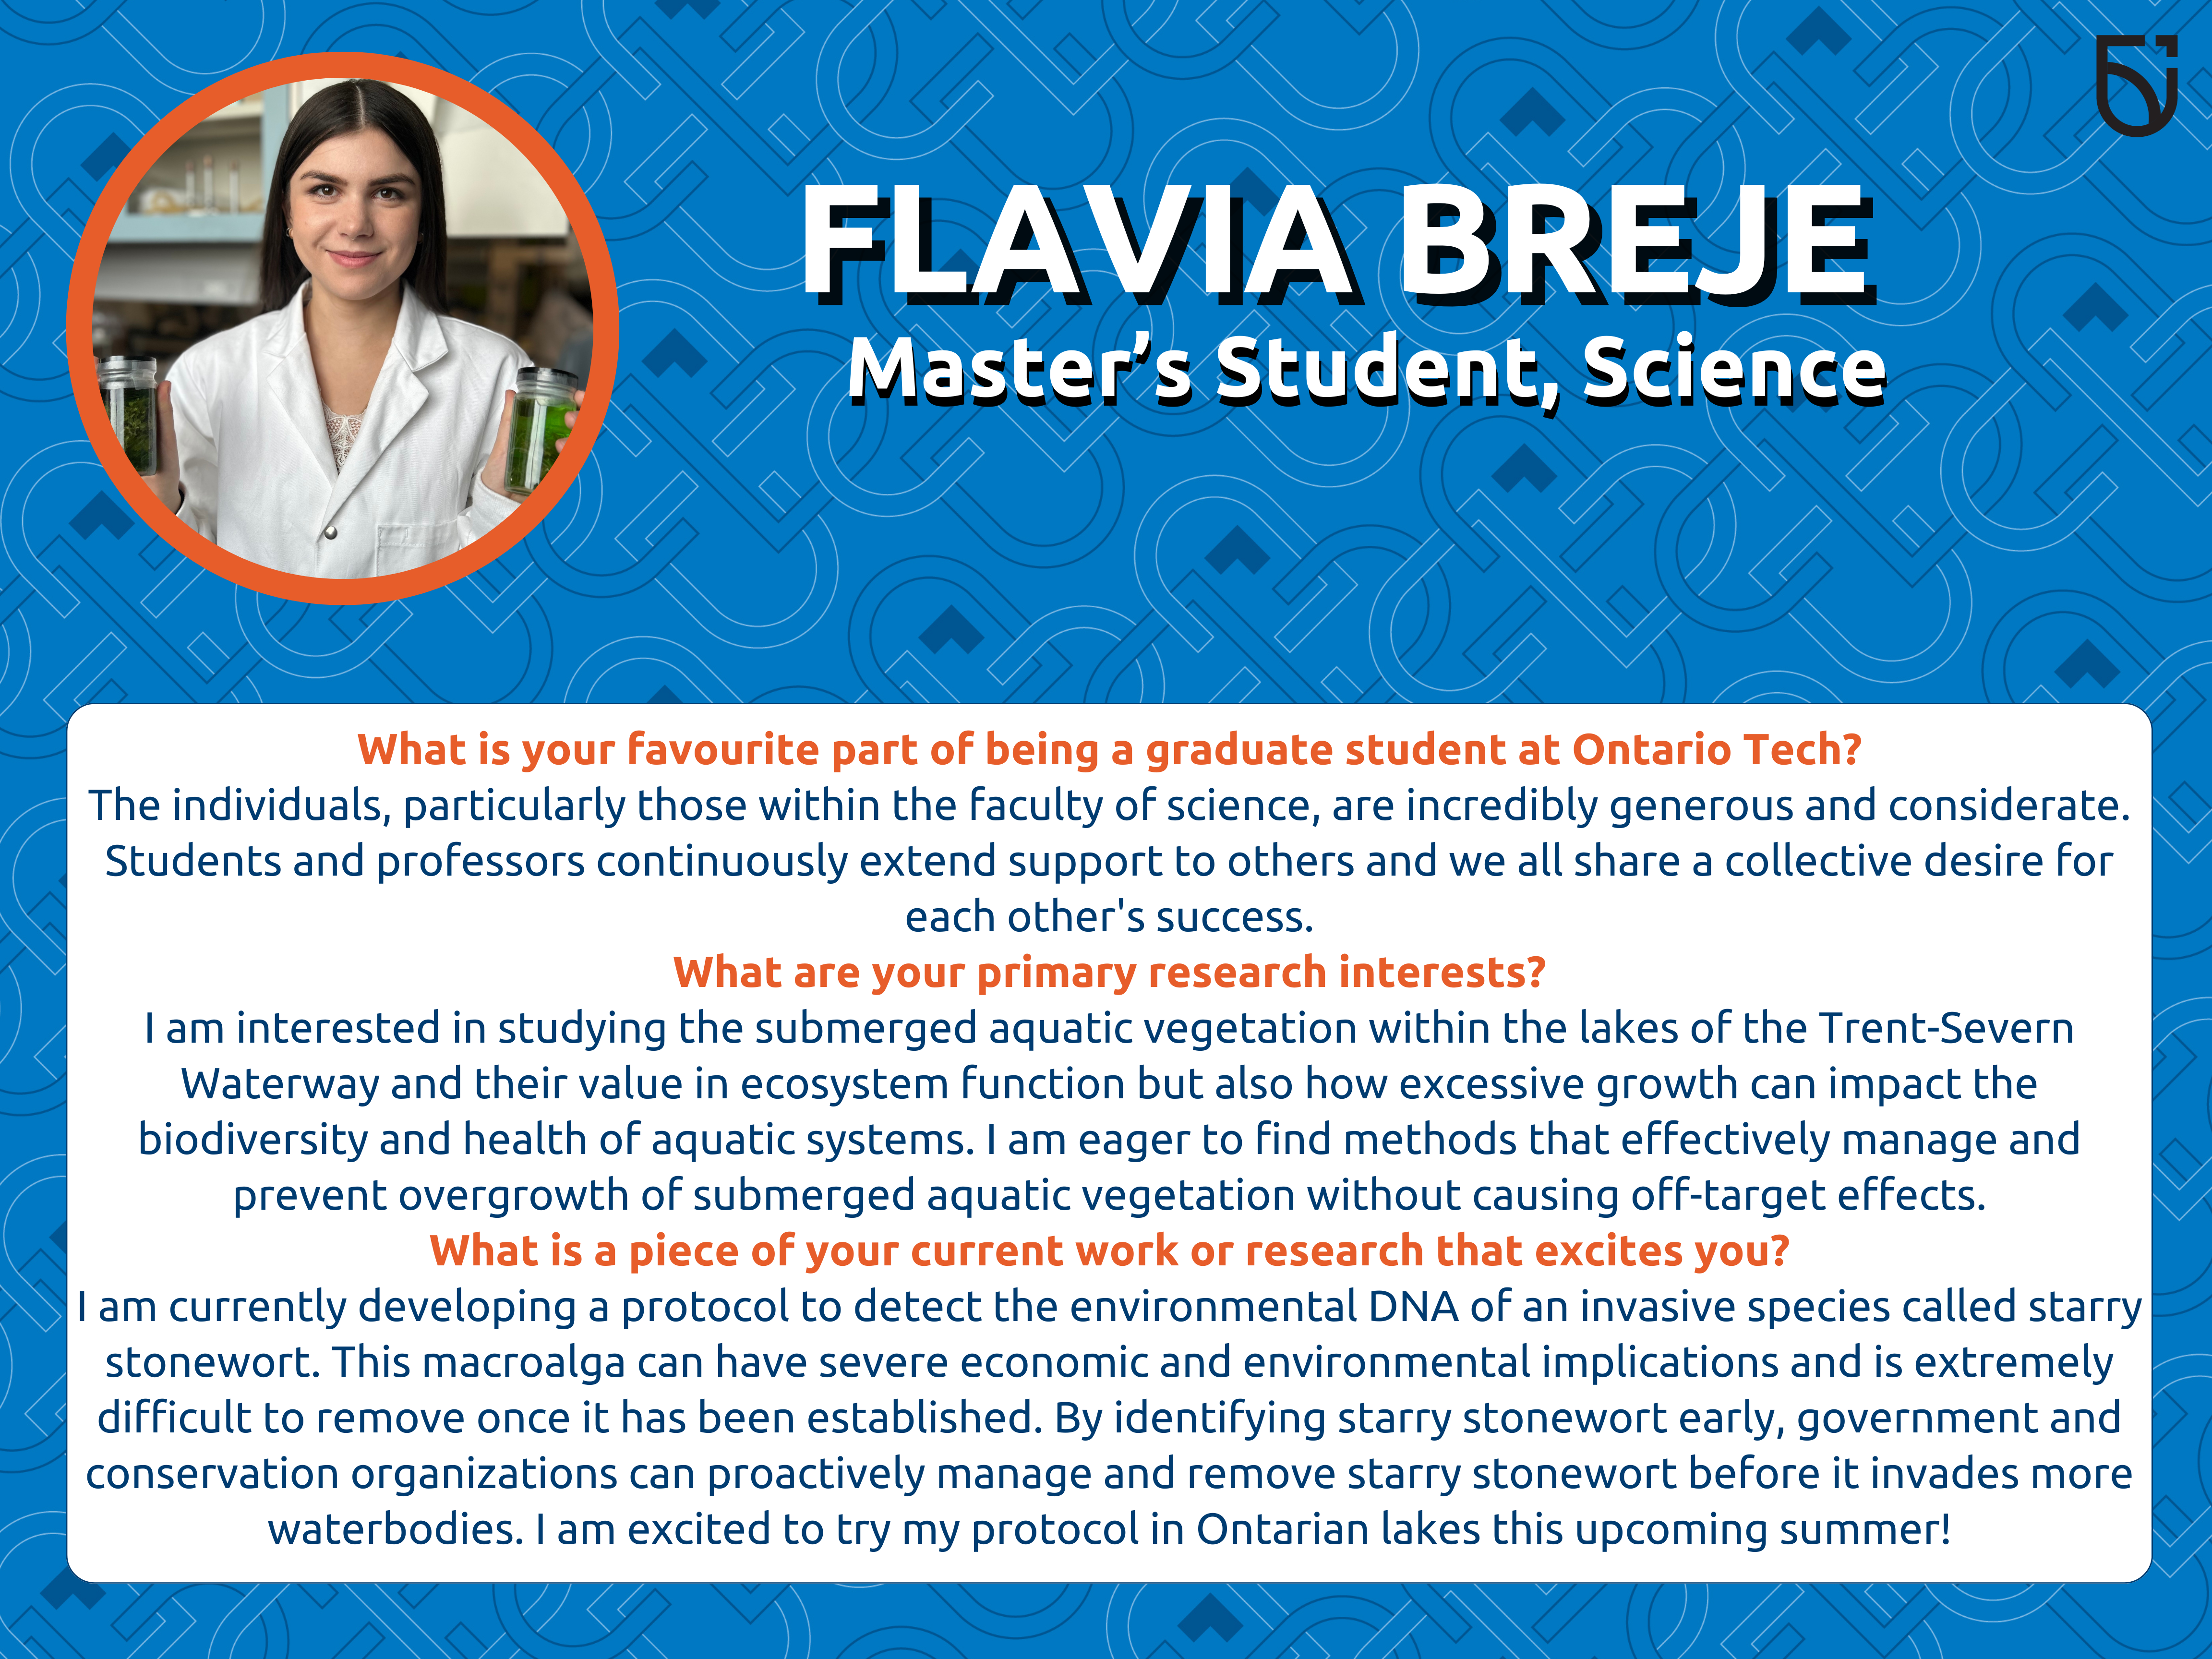 ww-website-breje.pngThis photo is a Women’s Wednesday feature of Flavia Breje, an MSc student in the Faculty of Science.